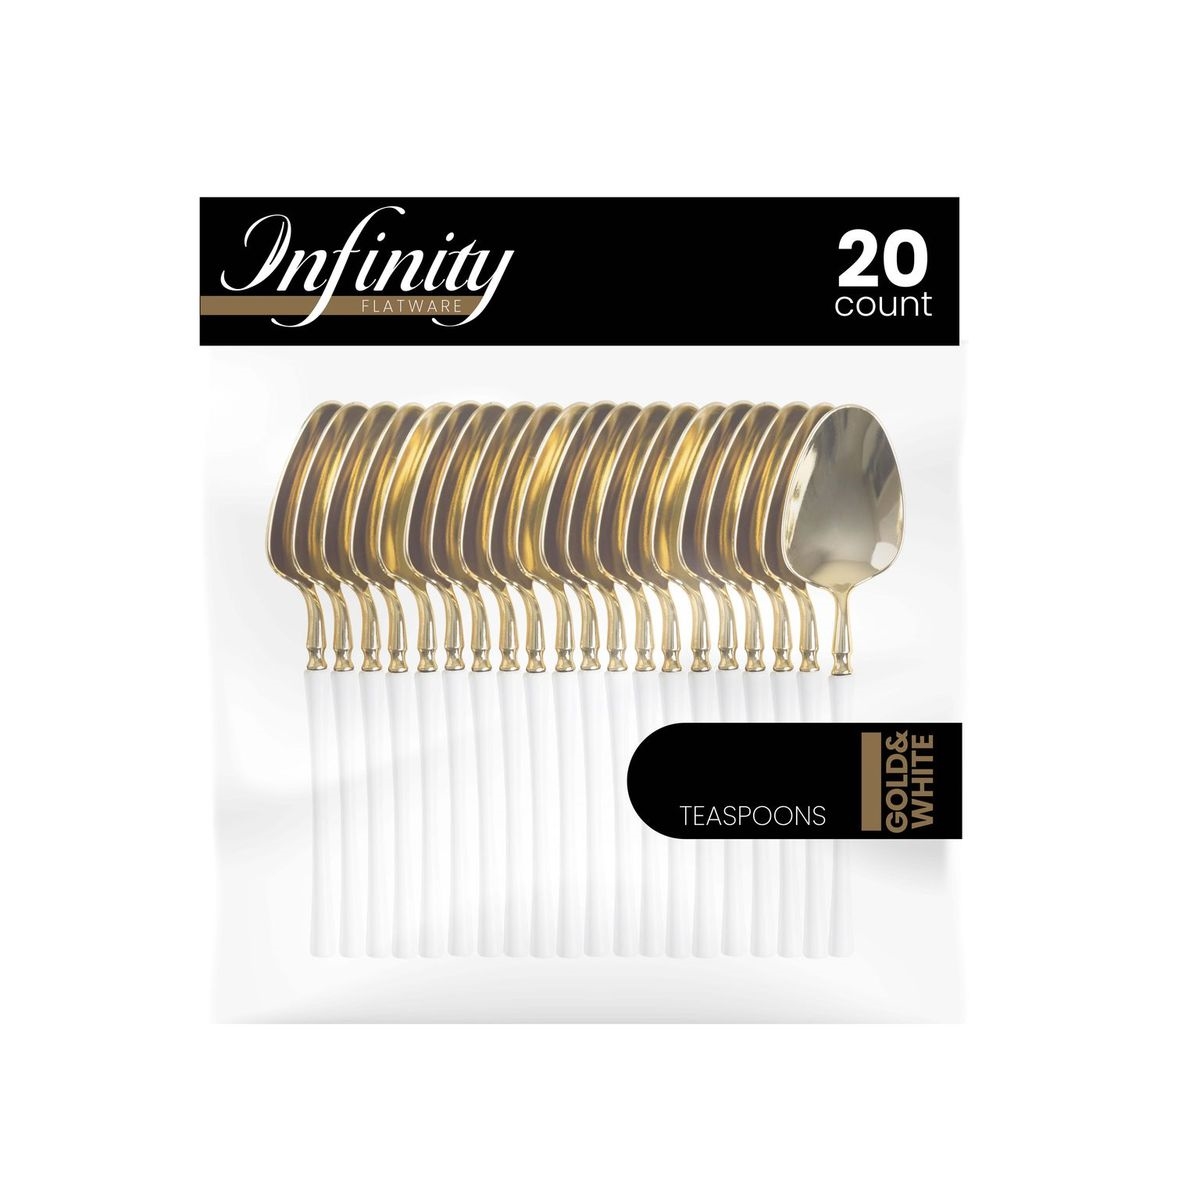 Infinity Flatware Gold and White Teaspoons 20ct